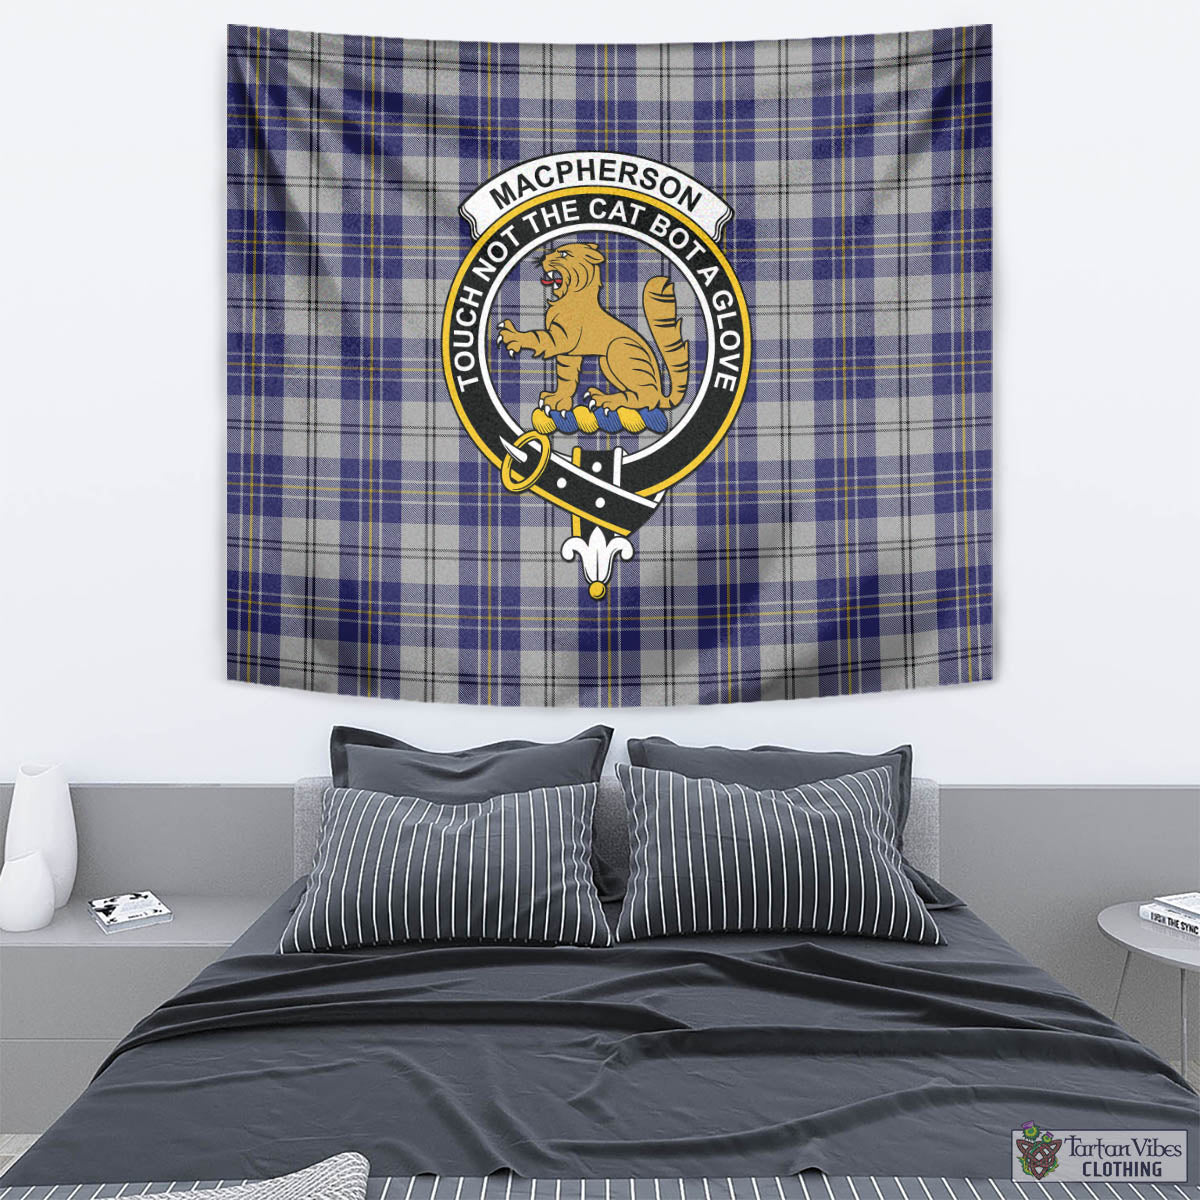 Tartan Vibes Clothing MacPherson Dress Blue Tartan Tapestry Wall Hanging and Home Decor for Room with Family Crest